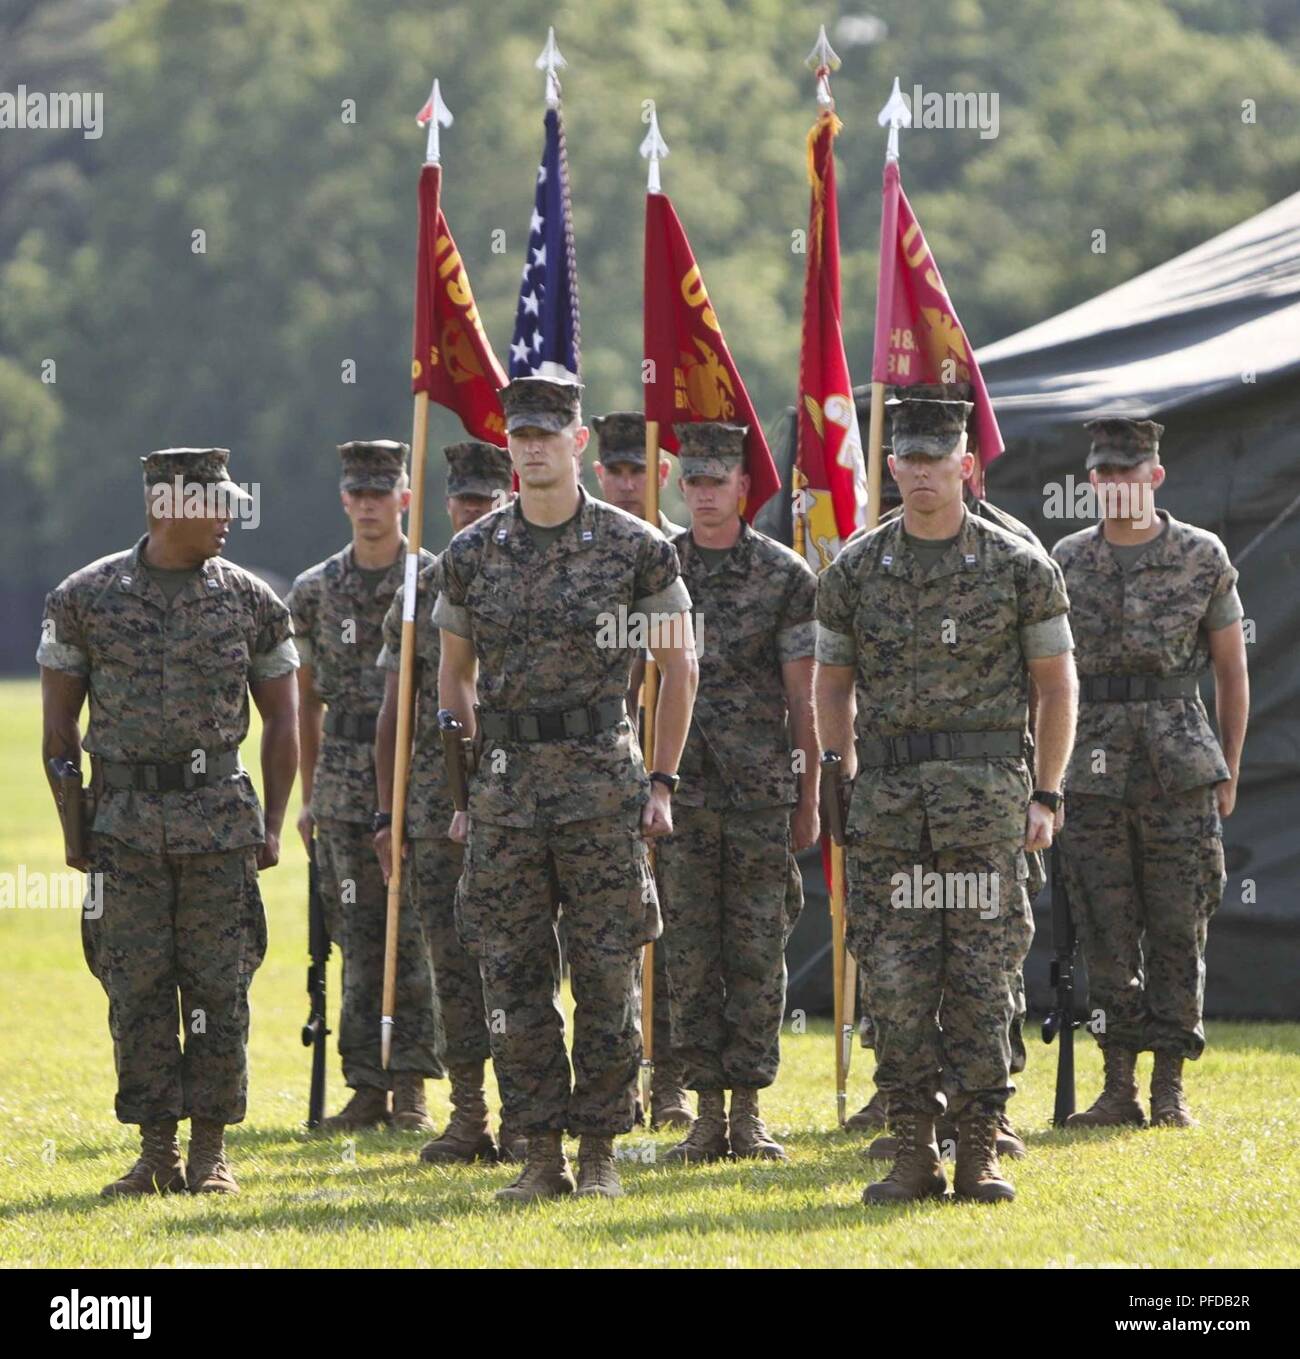 U.S. Marines assigned to Headquarters and Service (H&S) Battalion, School of Infantry-East, prepare to march during the H&S Battalion change of command ceremony at Camp Lejeune, N.C., June 8, 2018.  The change of command ceremony represents the offical passing of authority from the offgoing commander, Lt.Col. Kyle G. Phillips to the oncoming, Lt. Col. Amy E. Punzel. Stock Photo